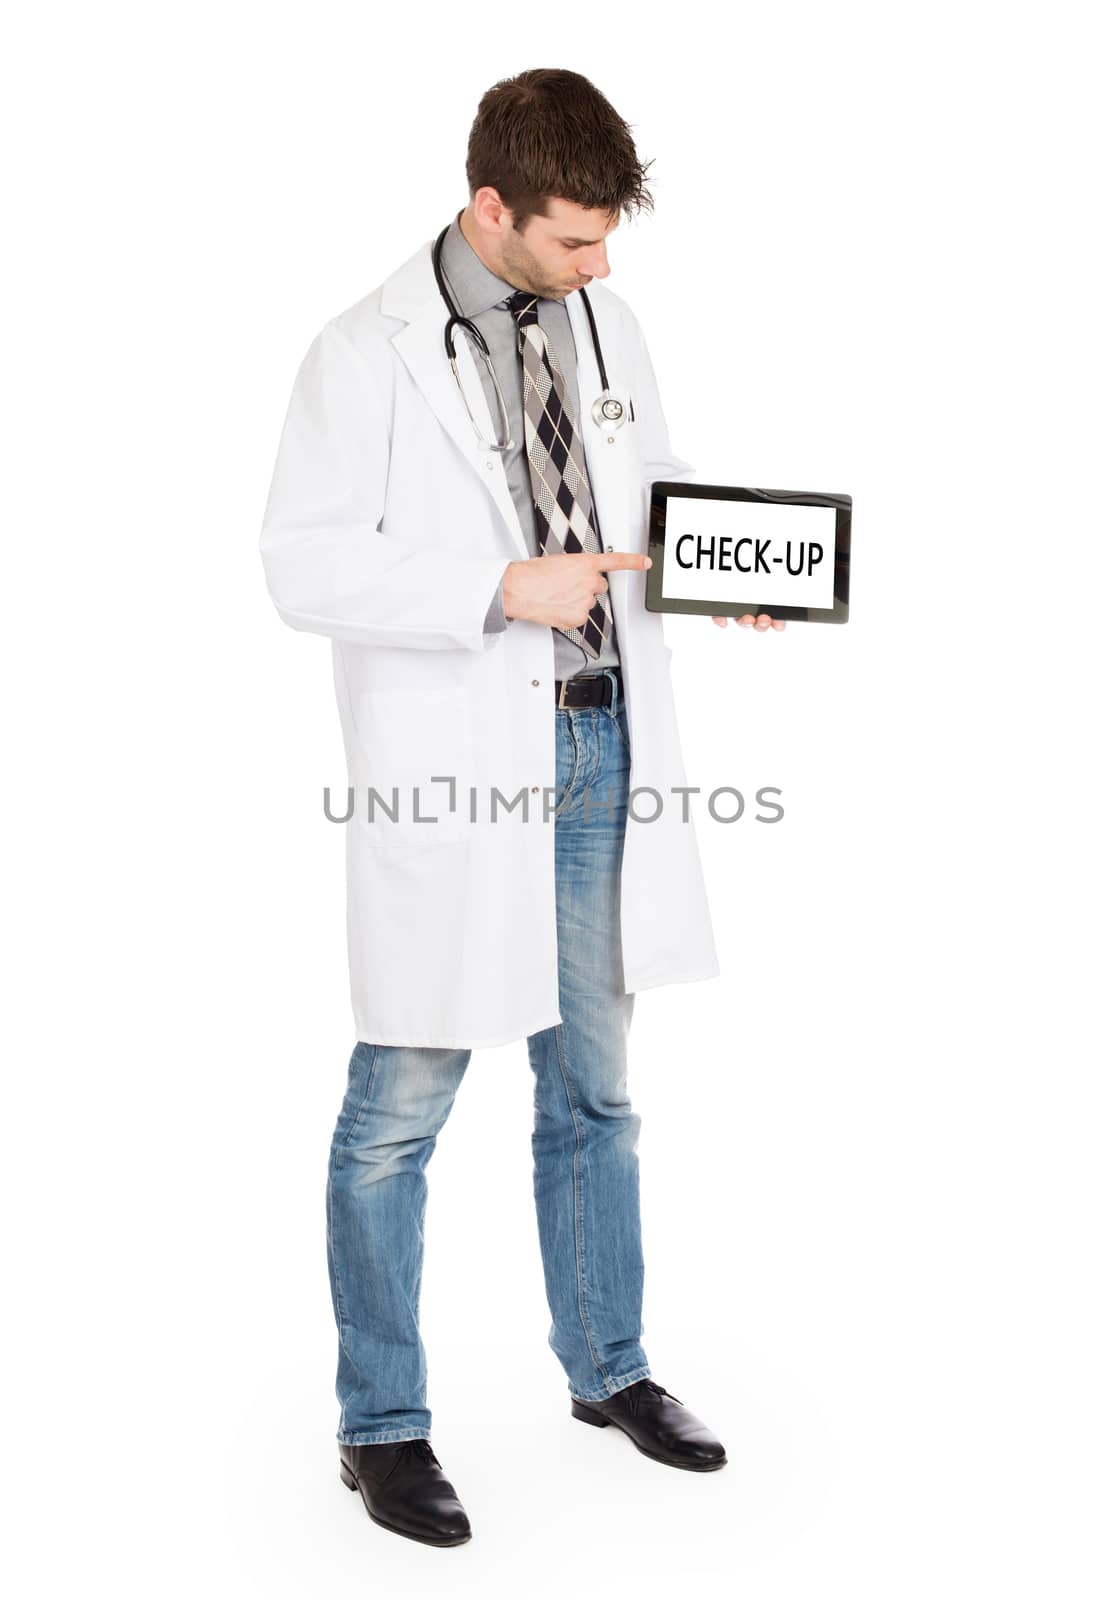 Doctor holding tablet - Check-up by michaklootwijk